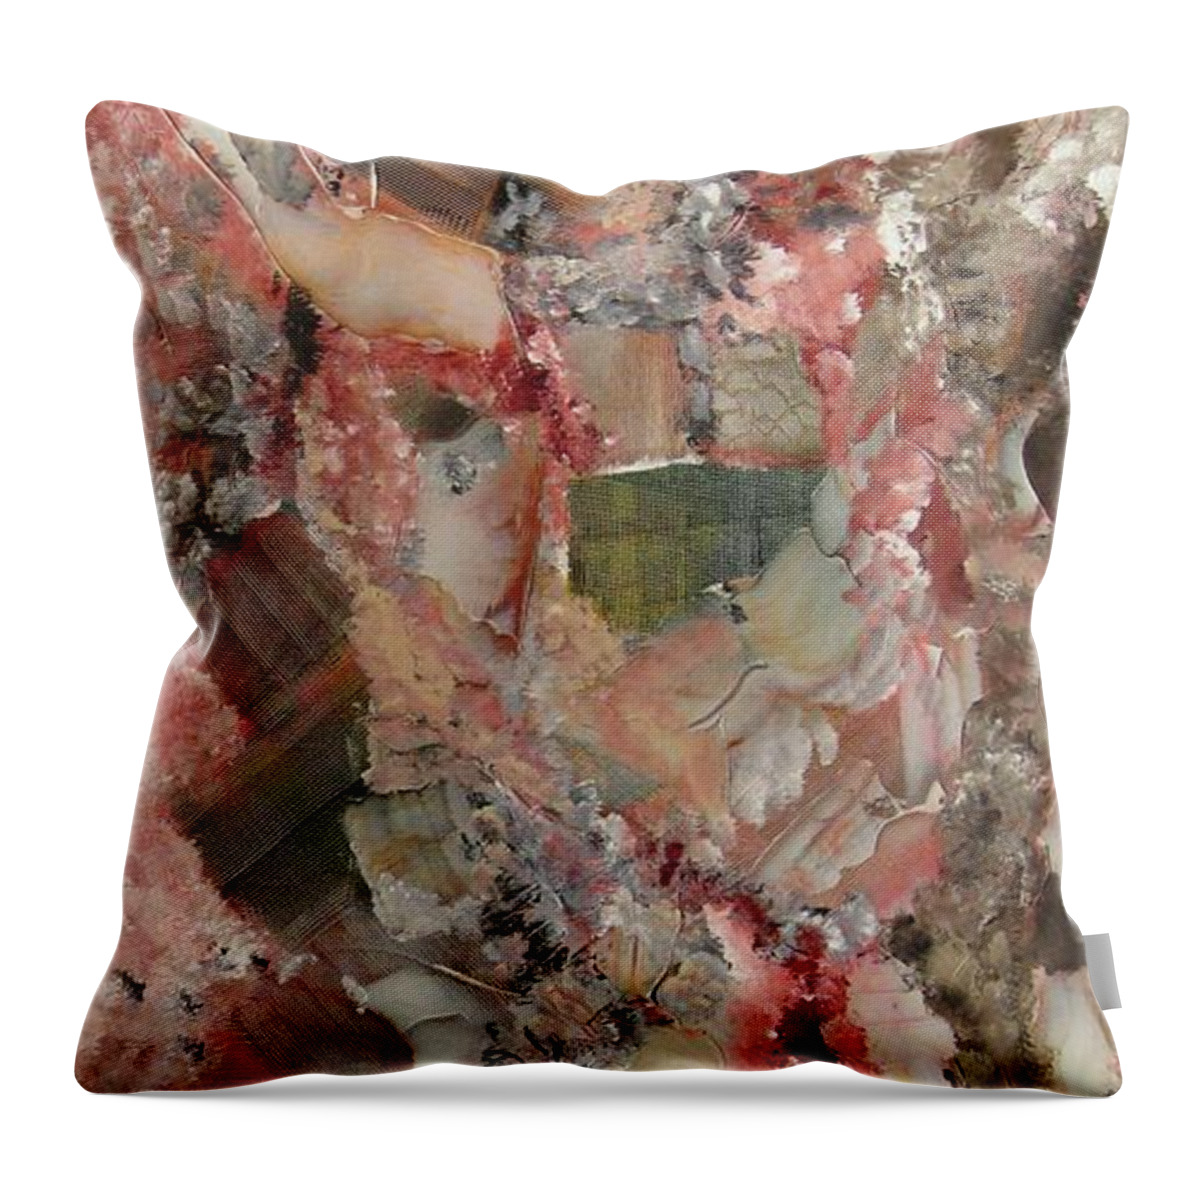 Abstract Throw Pillow featuring the painting Chosen Structures by Dennis Ellman